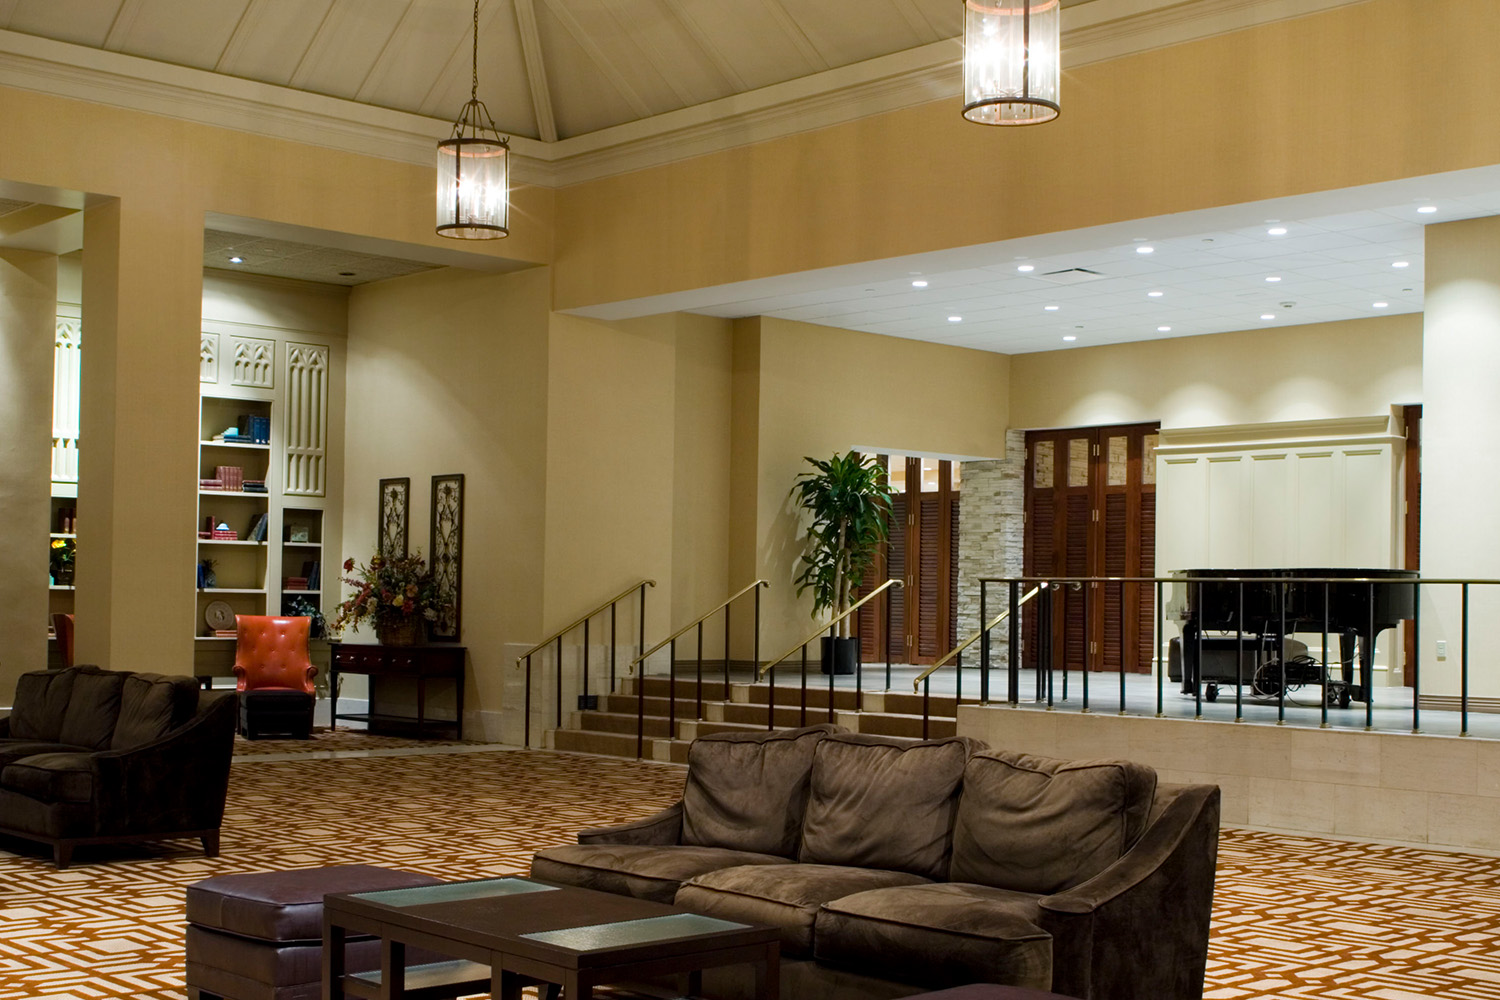 Lounge area with tall ceiling, light fixtures, and plush brown couches 